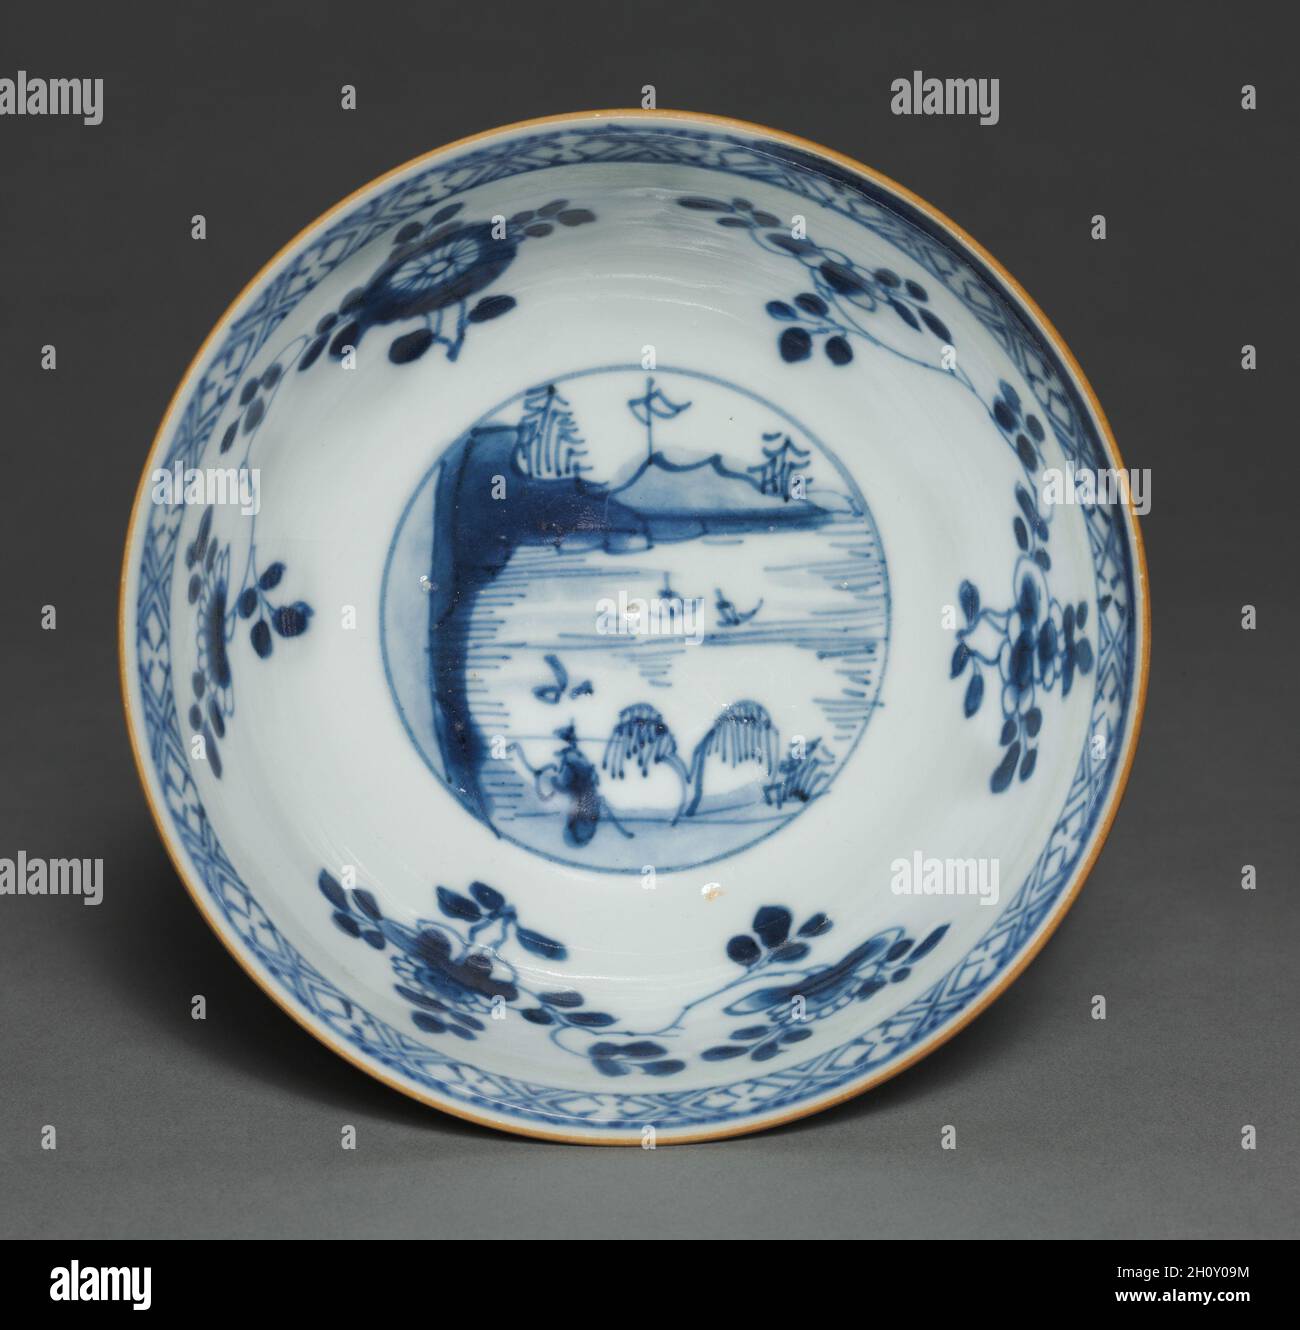 Bowl with Floral Sprays and Medallions with Figure in Landscape, 1723-35. China, Jiangxi province, Jingdezhen kilns, Qing dynasty (1644-1911), Yongzheng mark and reign (1723-35). Porcelain with underglaze blue decoration (interior) and café-au-lait glaze (exterior); diameter: 14.6 cm (5 3/4 in.); overall: 7 cm (2 3/4 in.). Stock Photo